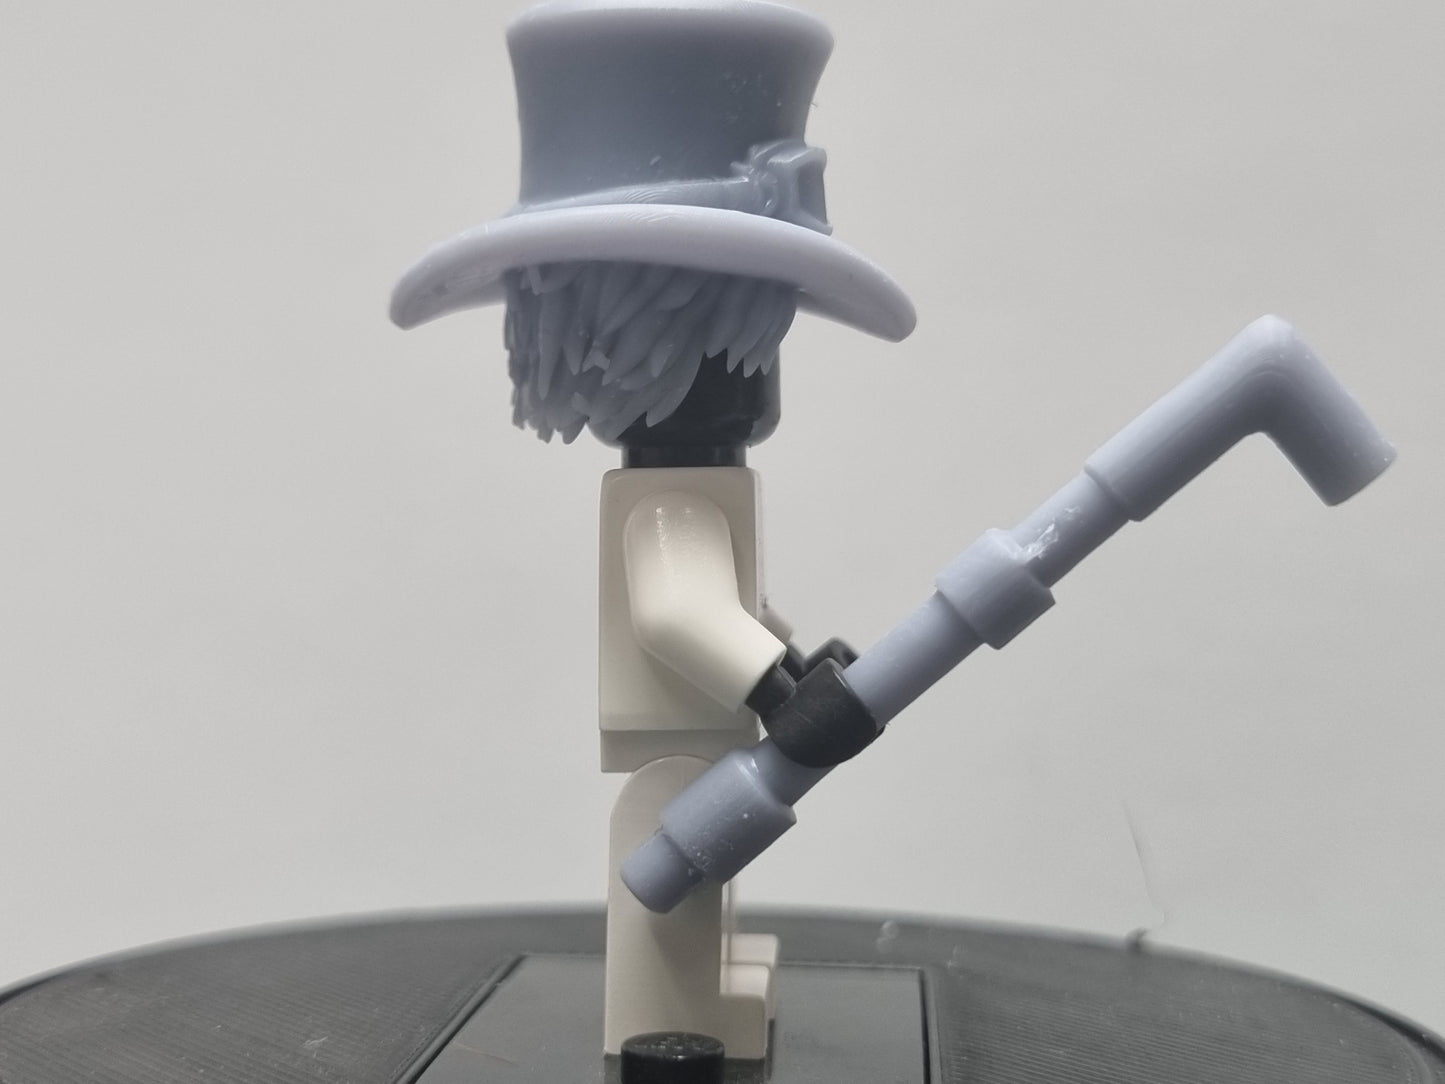 Custom 3D printed Lego compatible man with pipe set!